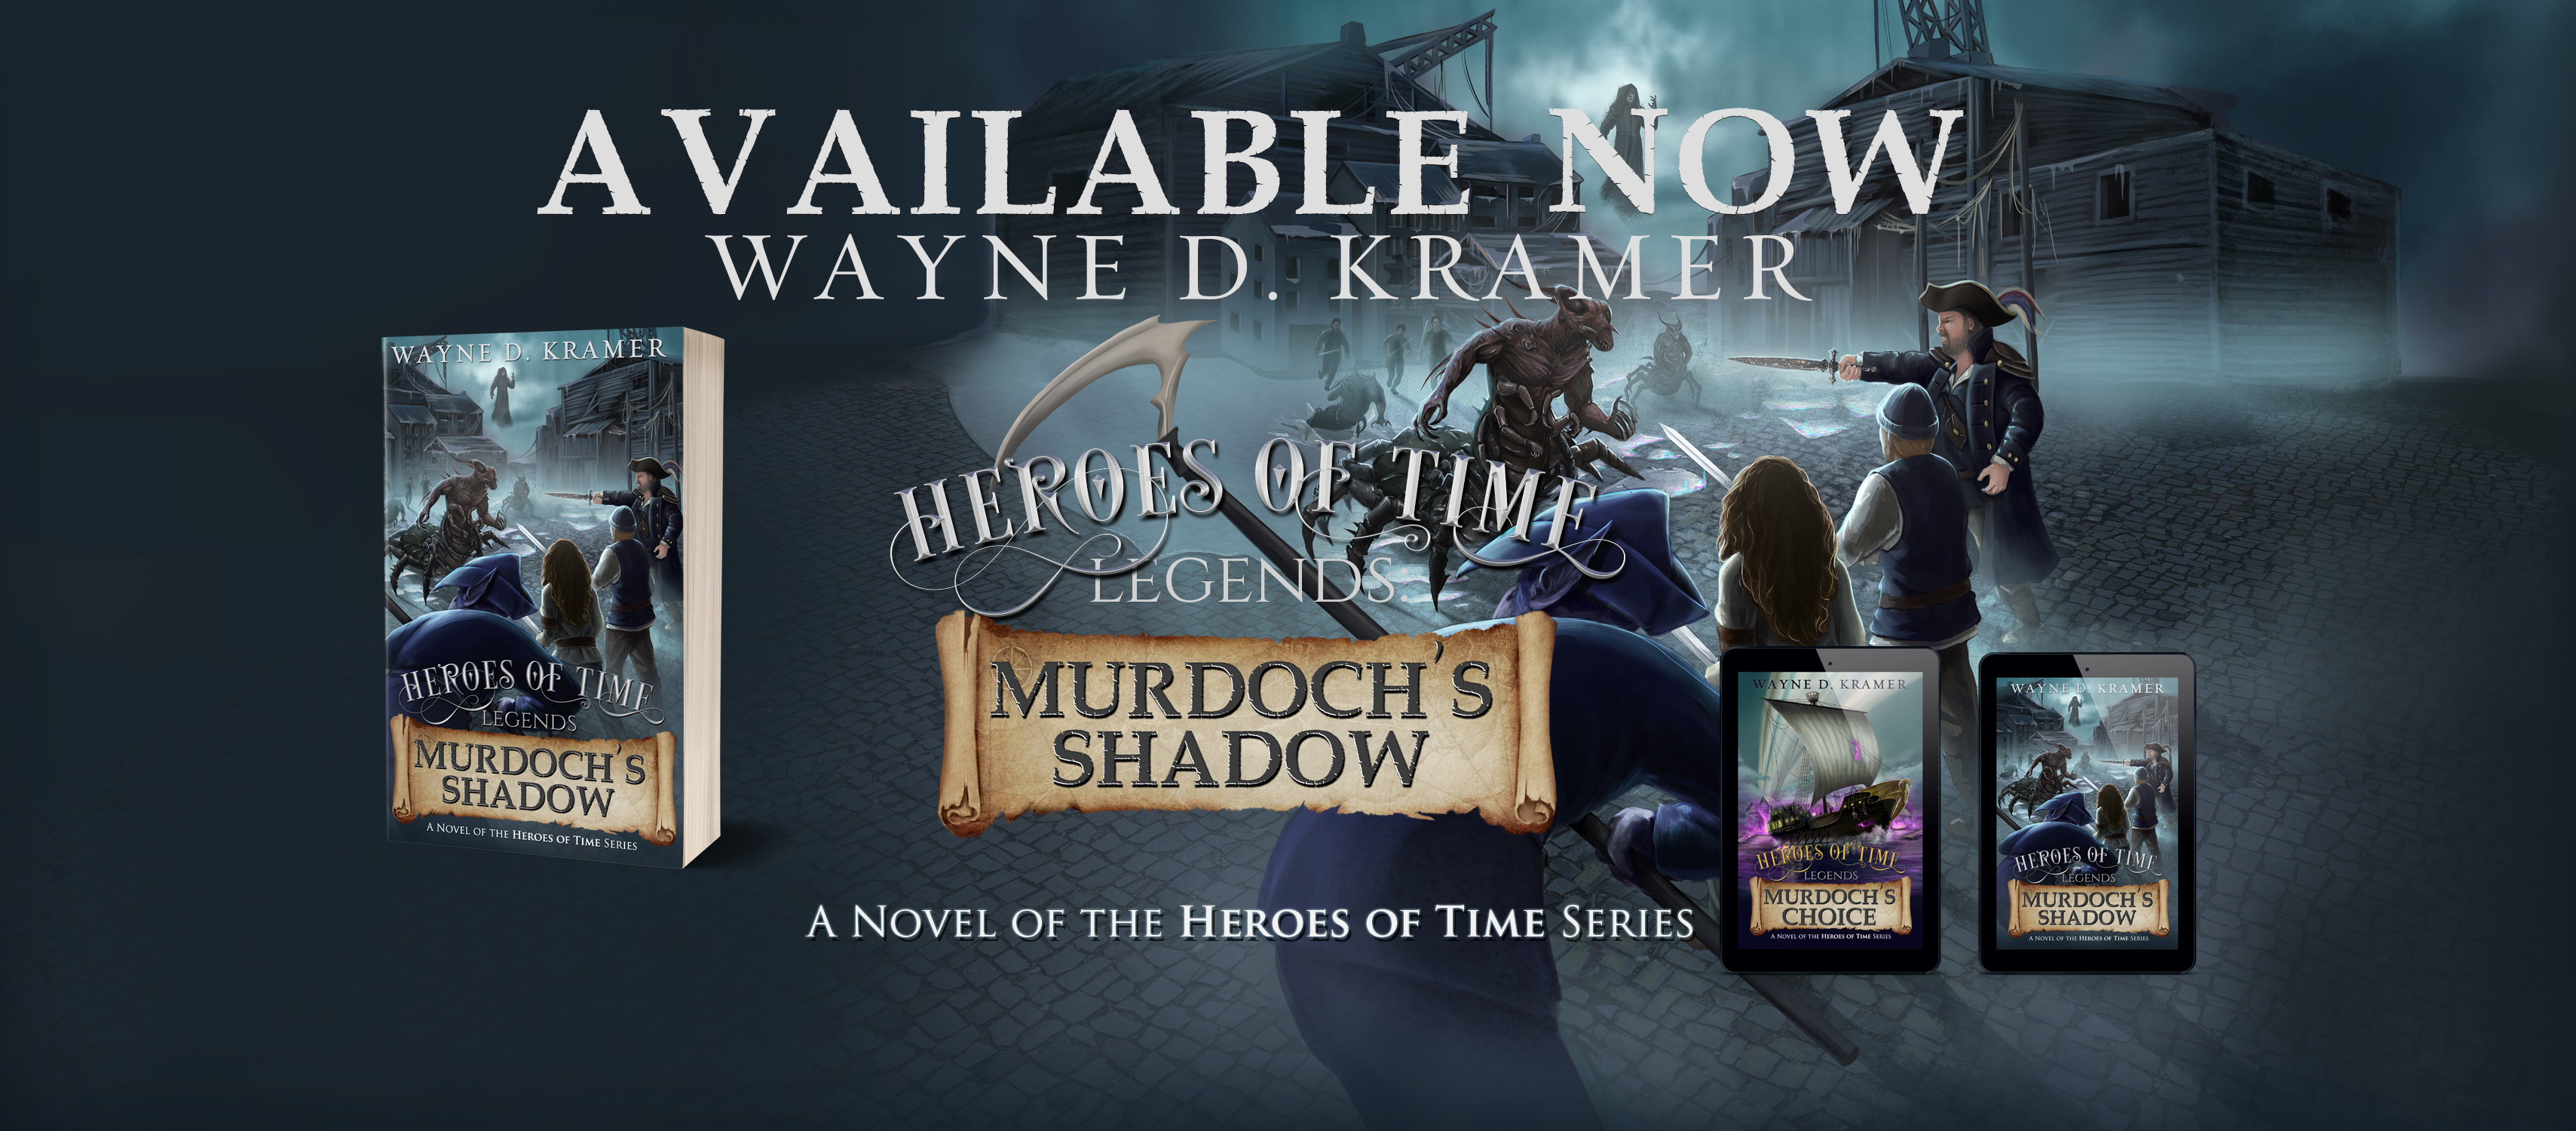 Heroes of Time Legends: Murdoch's Shadow - Available Now!